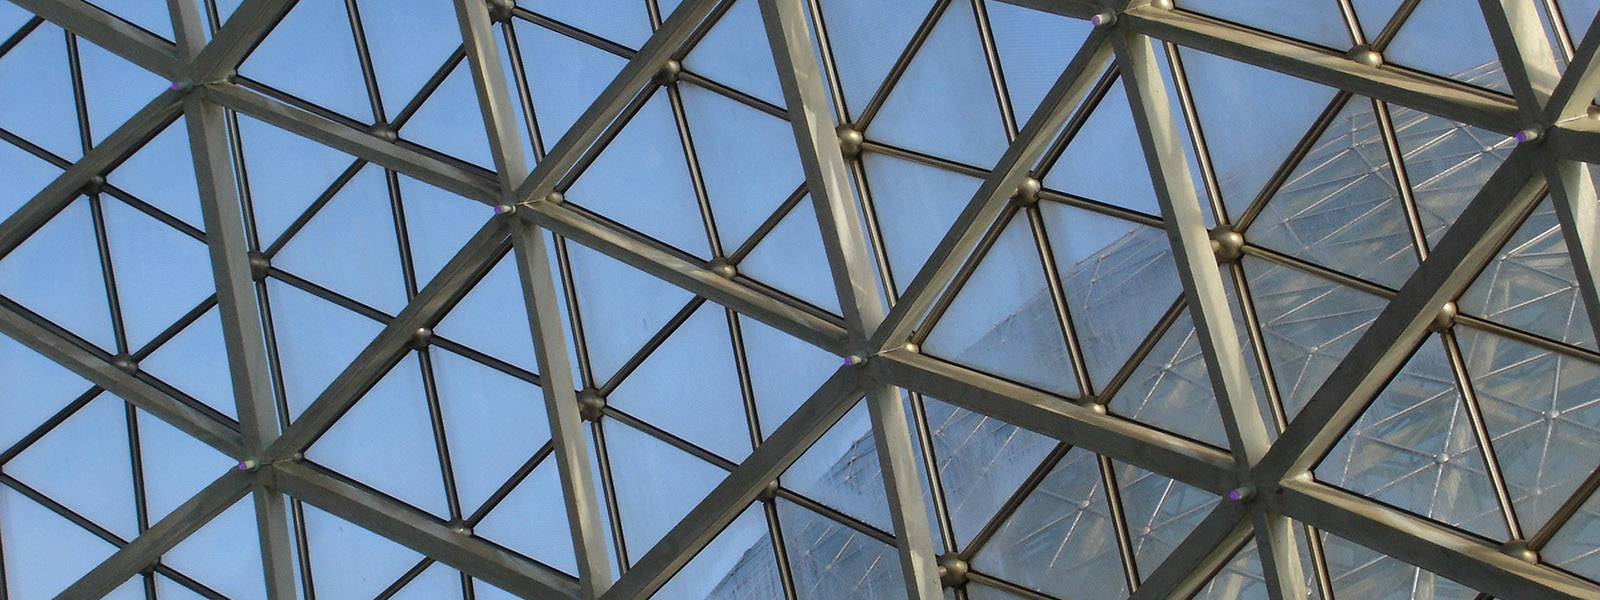 Looking out through glass domes from an indoor botanical garden.